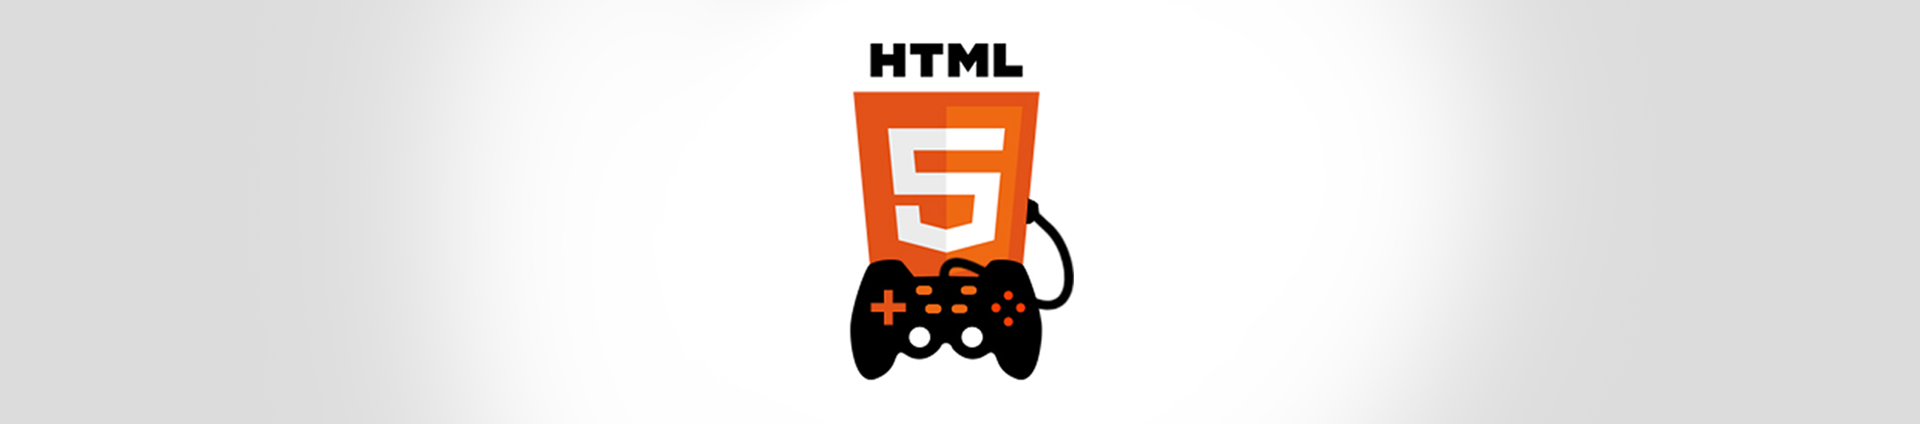 Top rated HTML5 games 